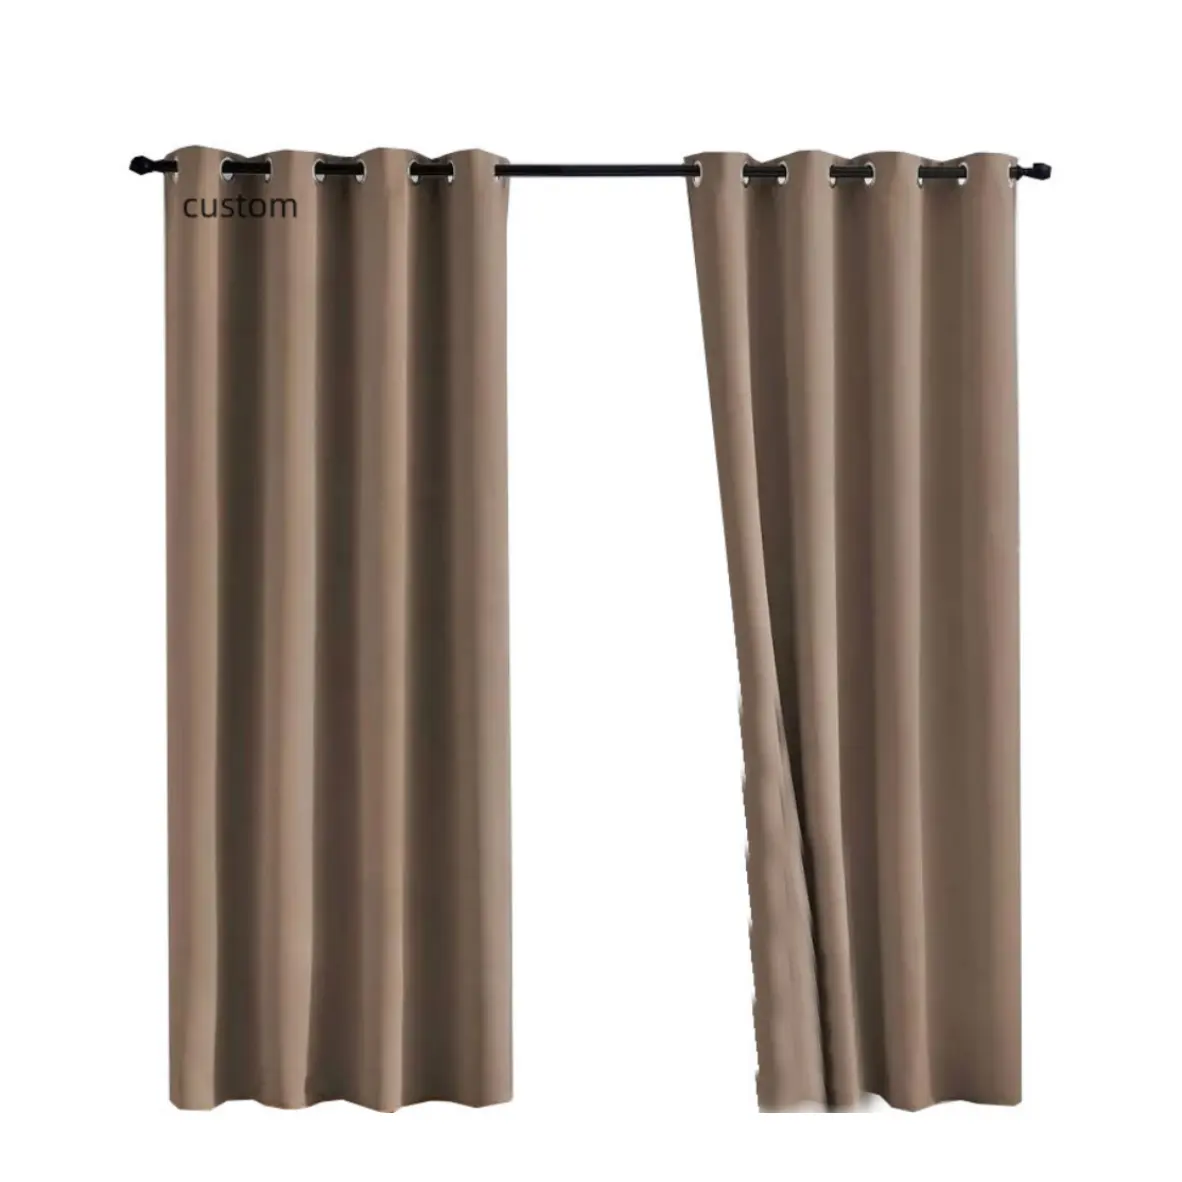 Luxury Window Curtain Blackout Thick Sequin Rideau De Salon For Bedroom And Living Room Shade Use For Hotel